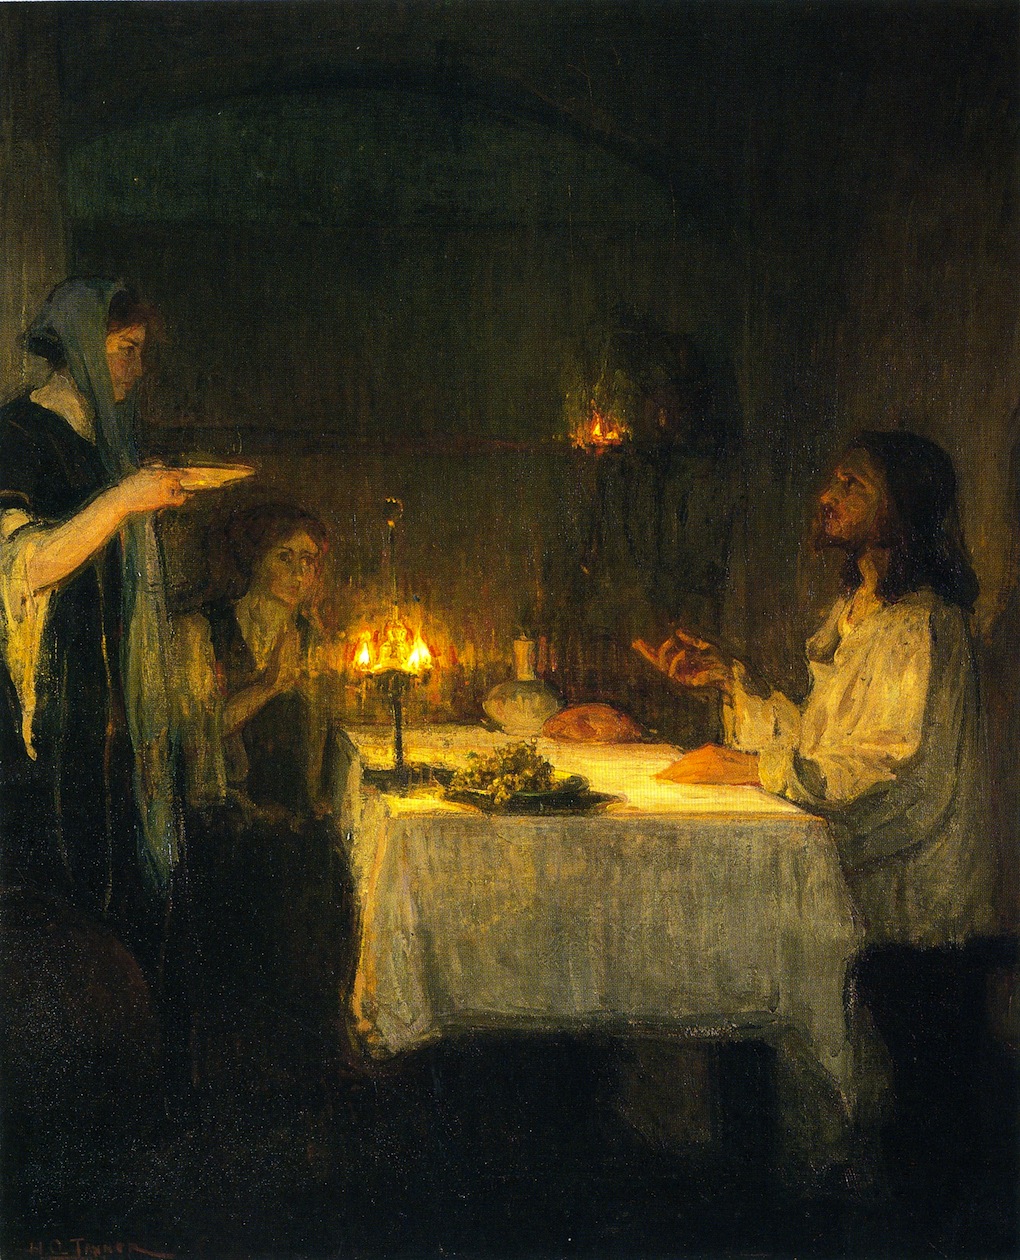 Oil painting showing three figures around a table covered with a white cloth. On the right, seated, is a male figure representing Christ, with one hand lying on the table and the other gesturing to a standing female figure on the left, representing Martha, who is holding a plate. Between them is a seated female figure representing Mary, who holds her hands in front of her in a gesture of prayer.